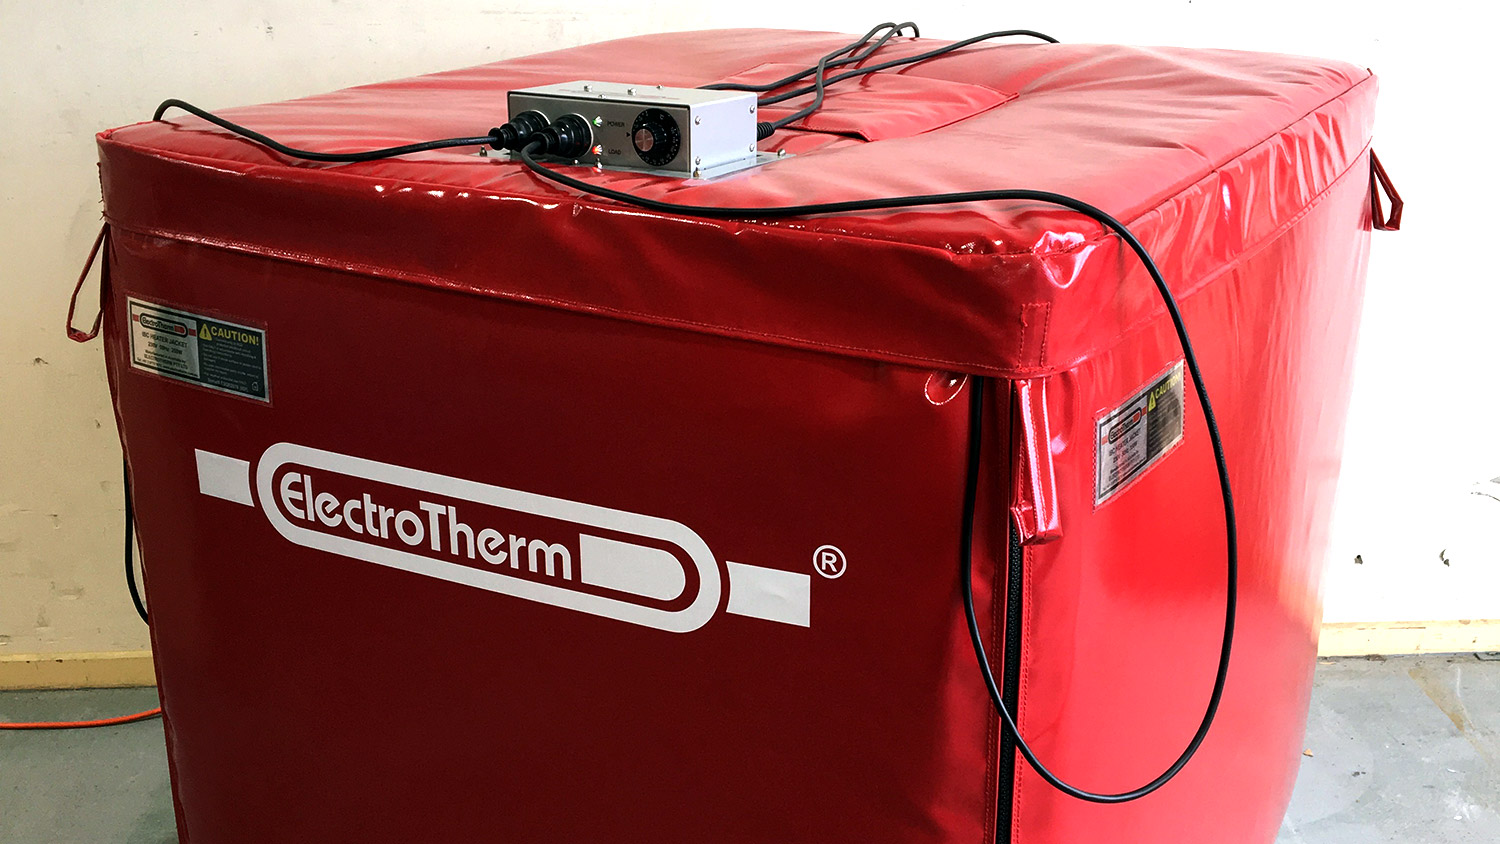 electrotherm-banner-3-1500px